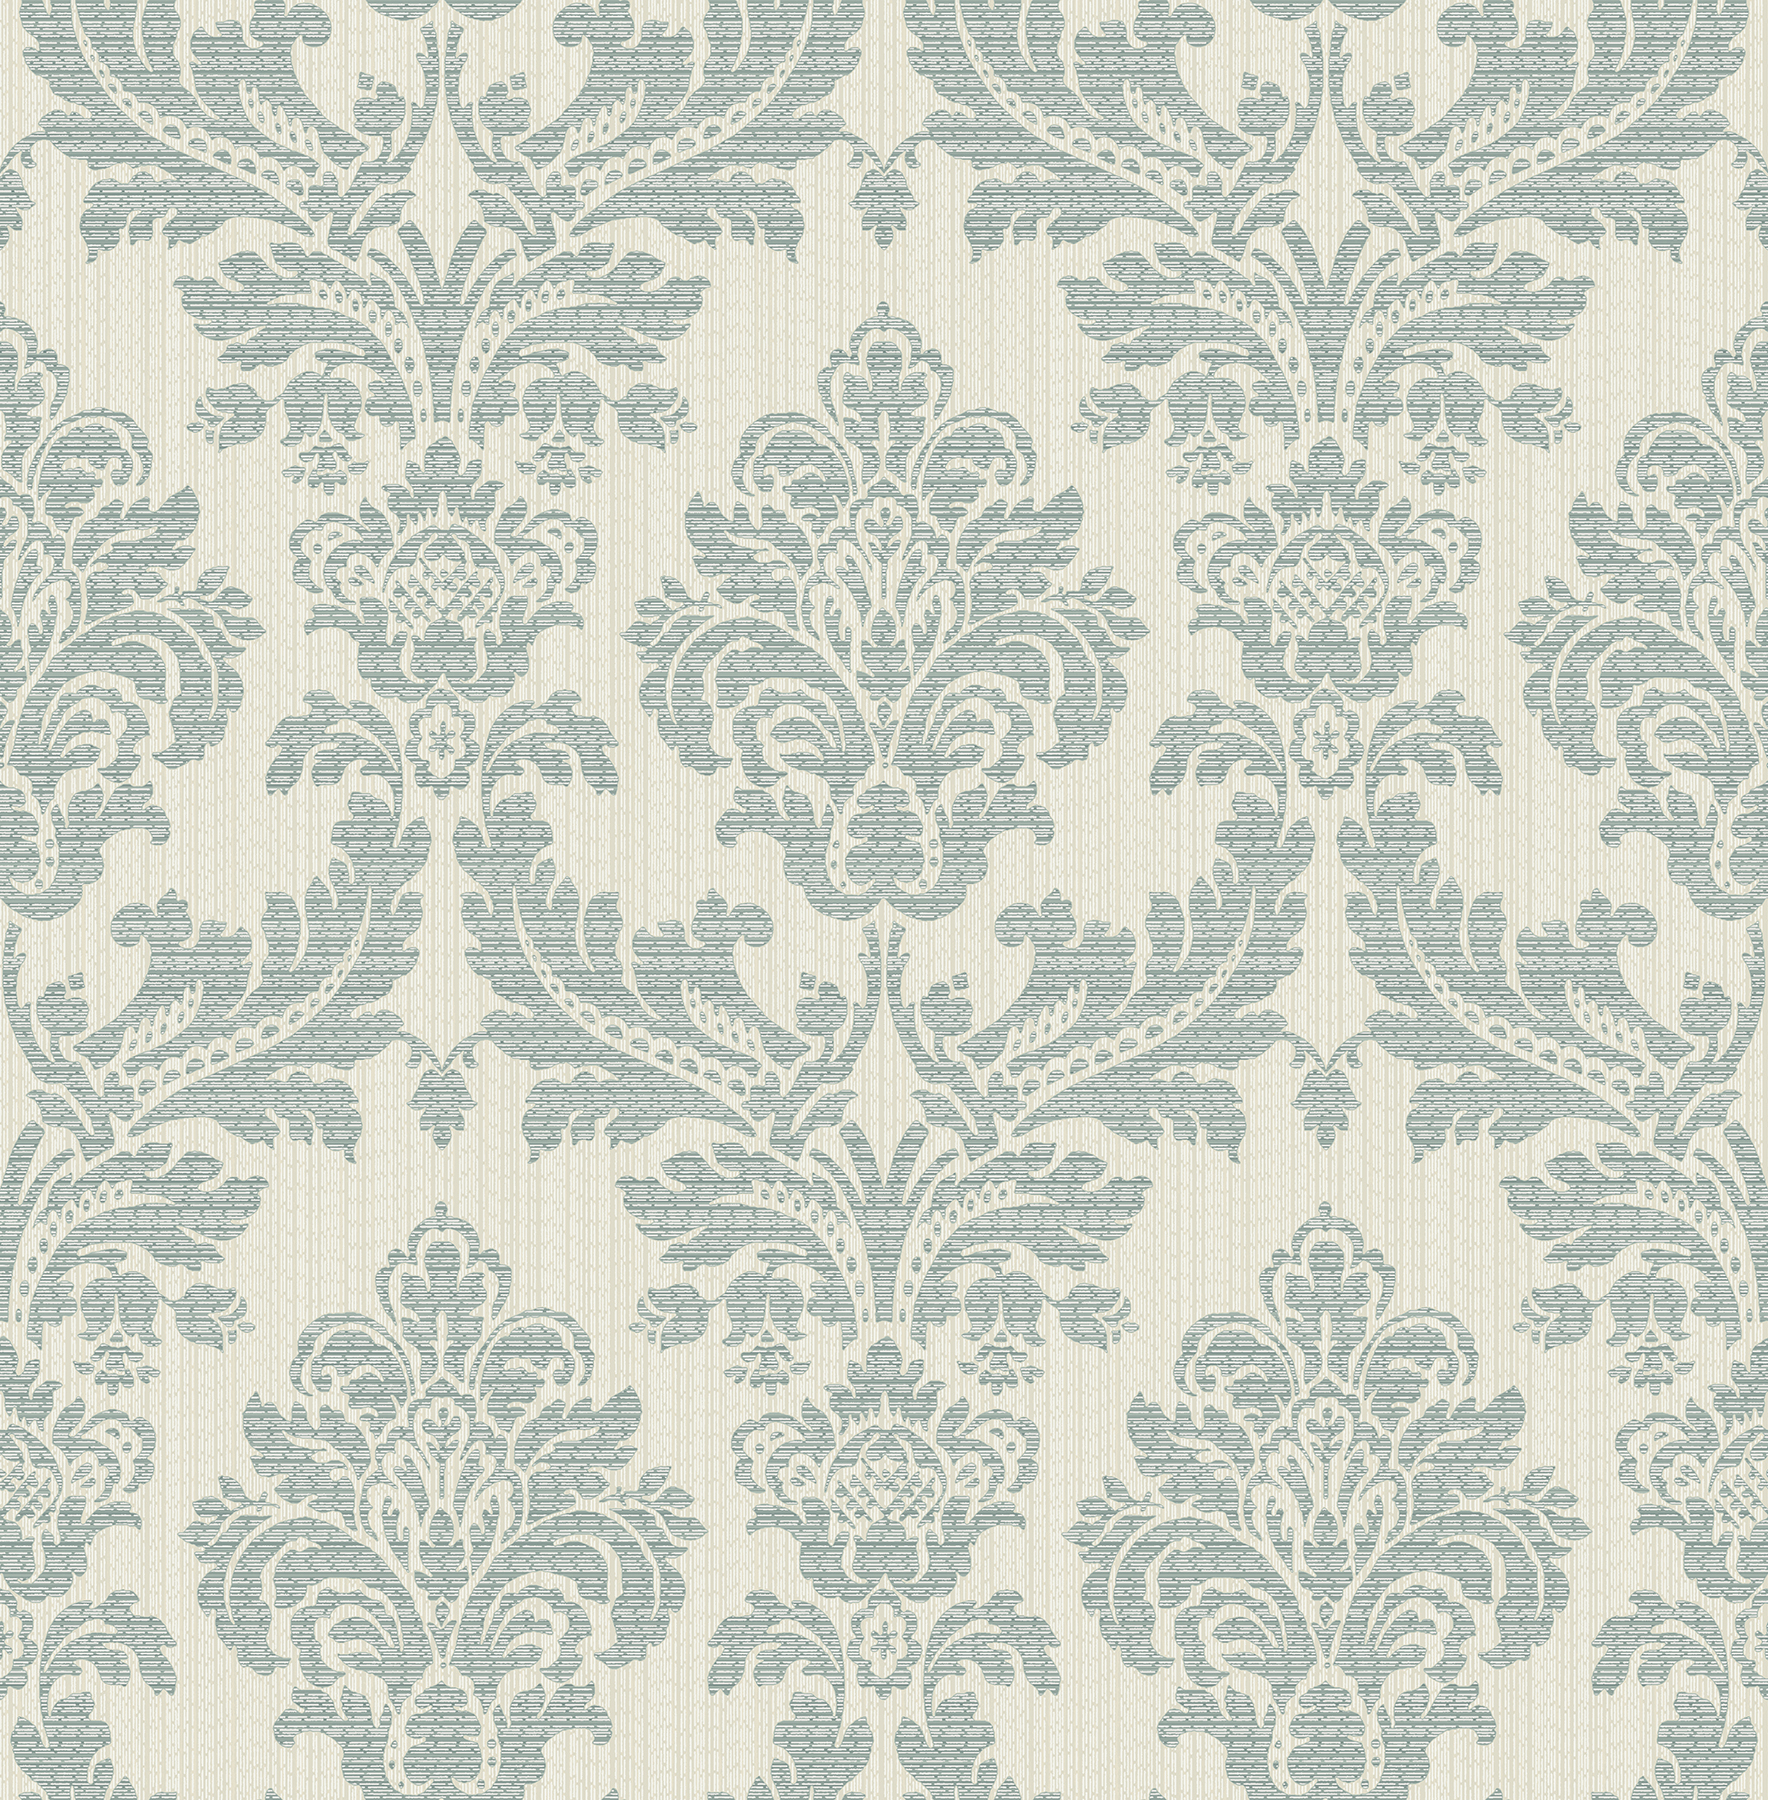 Advantage Piers Teal Texture Damask Unpasted Non Woven Wallpaper, 20.5-in by 33-ft, 56.4 sq. ft. - image 1 of 3